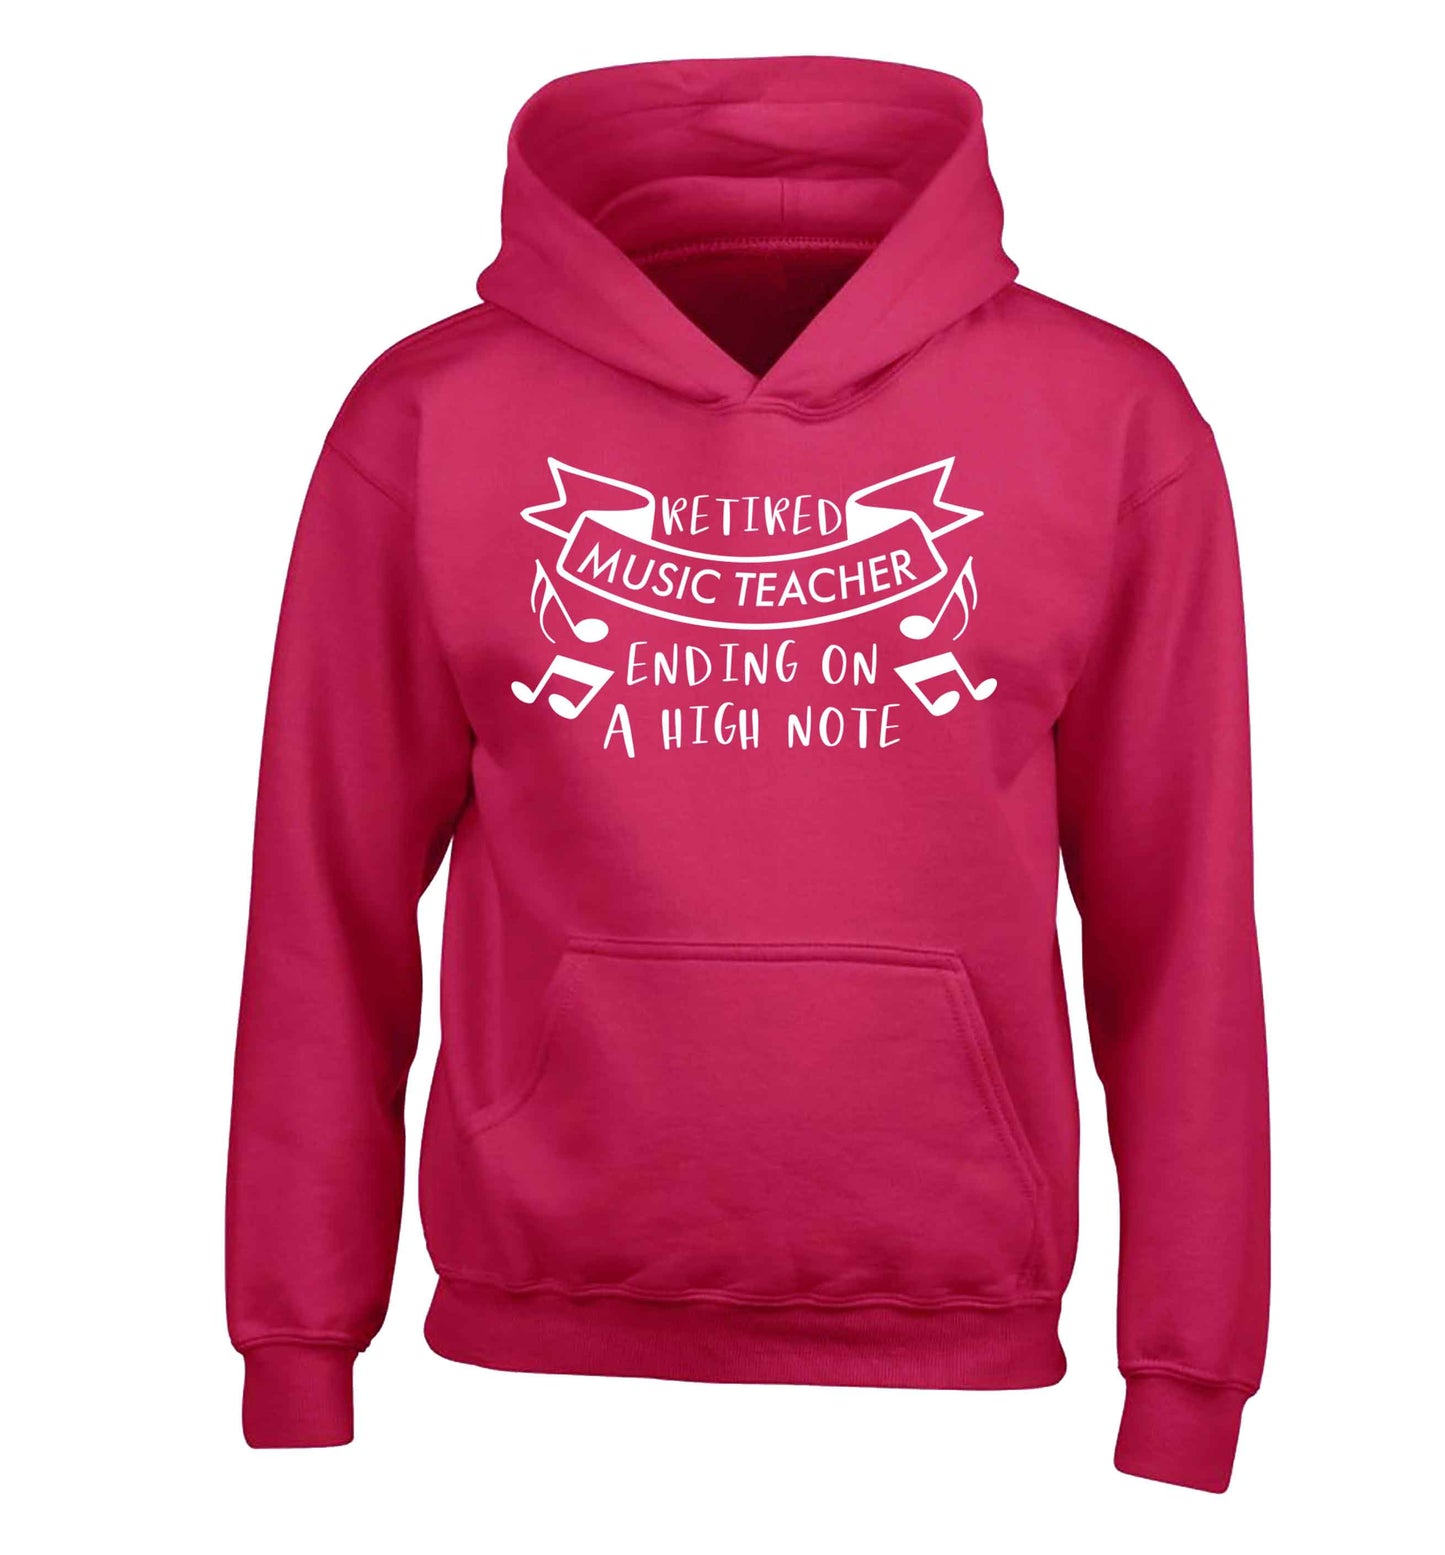 Retired music teacher ending on a high note children's pink hoodie 12-13 Years